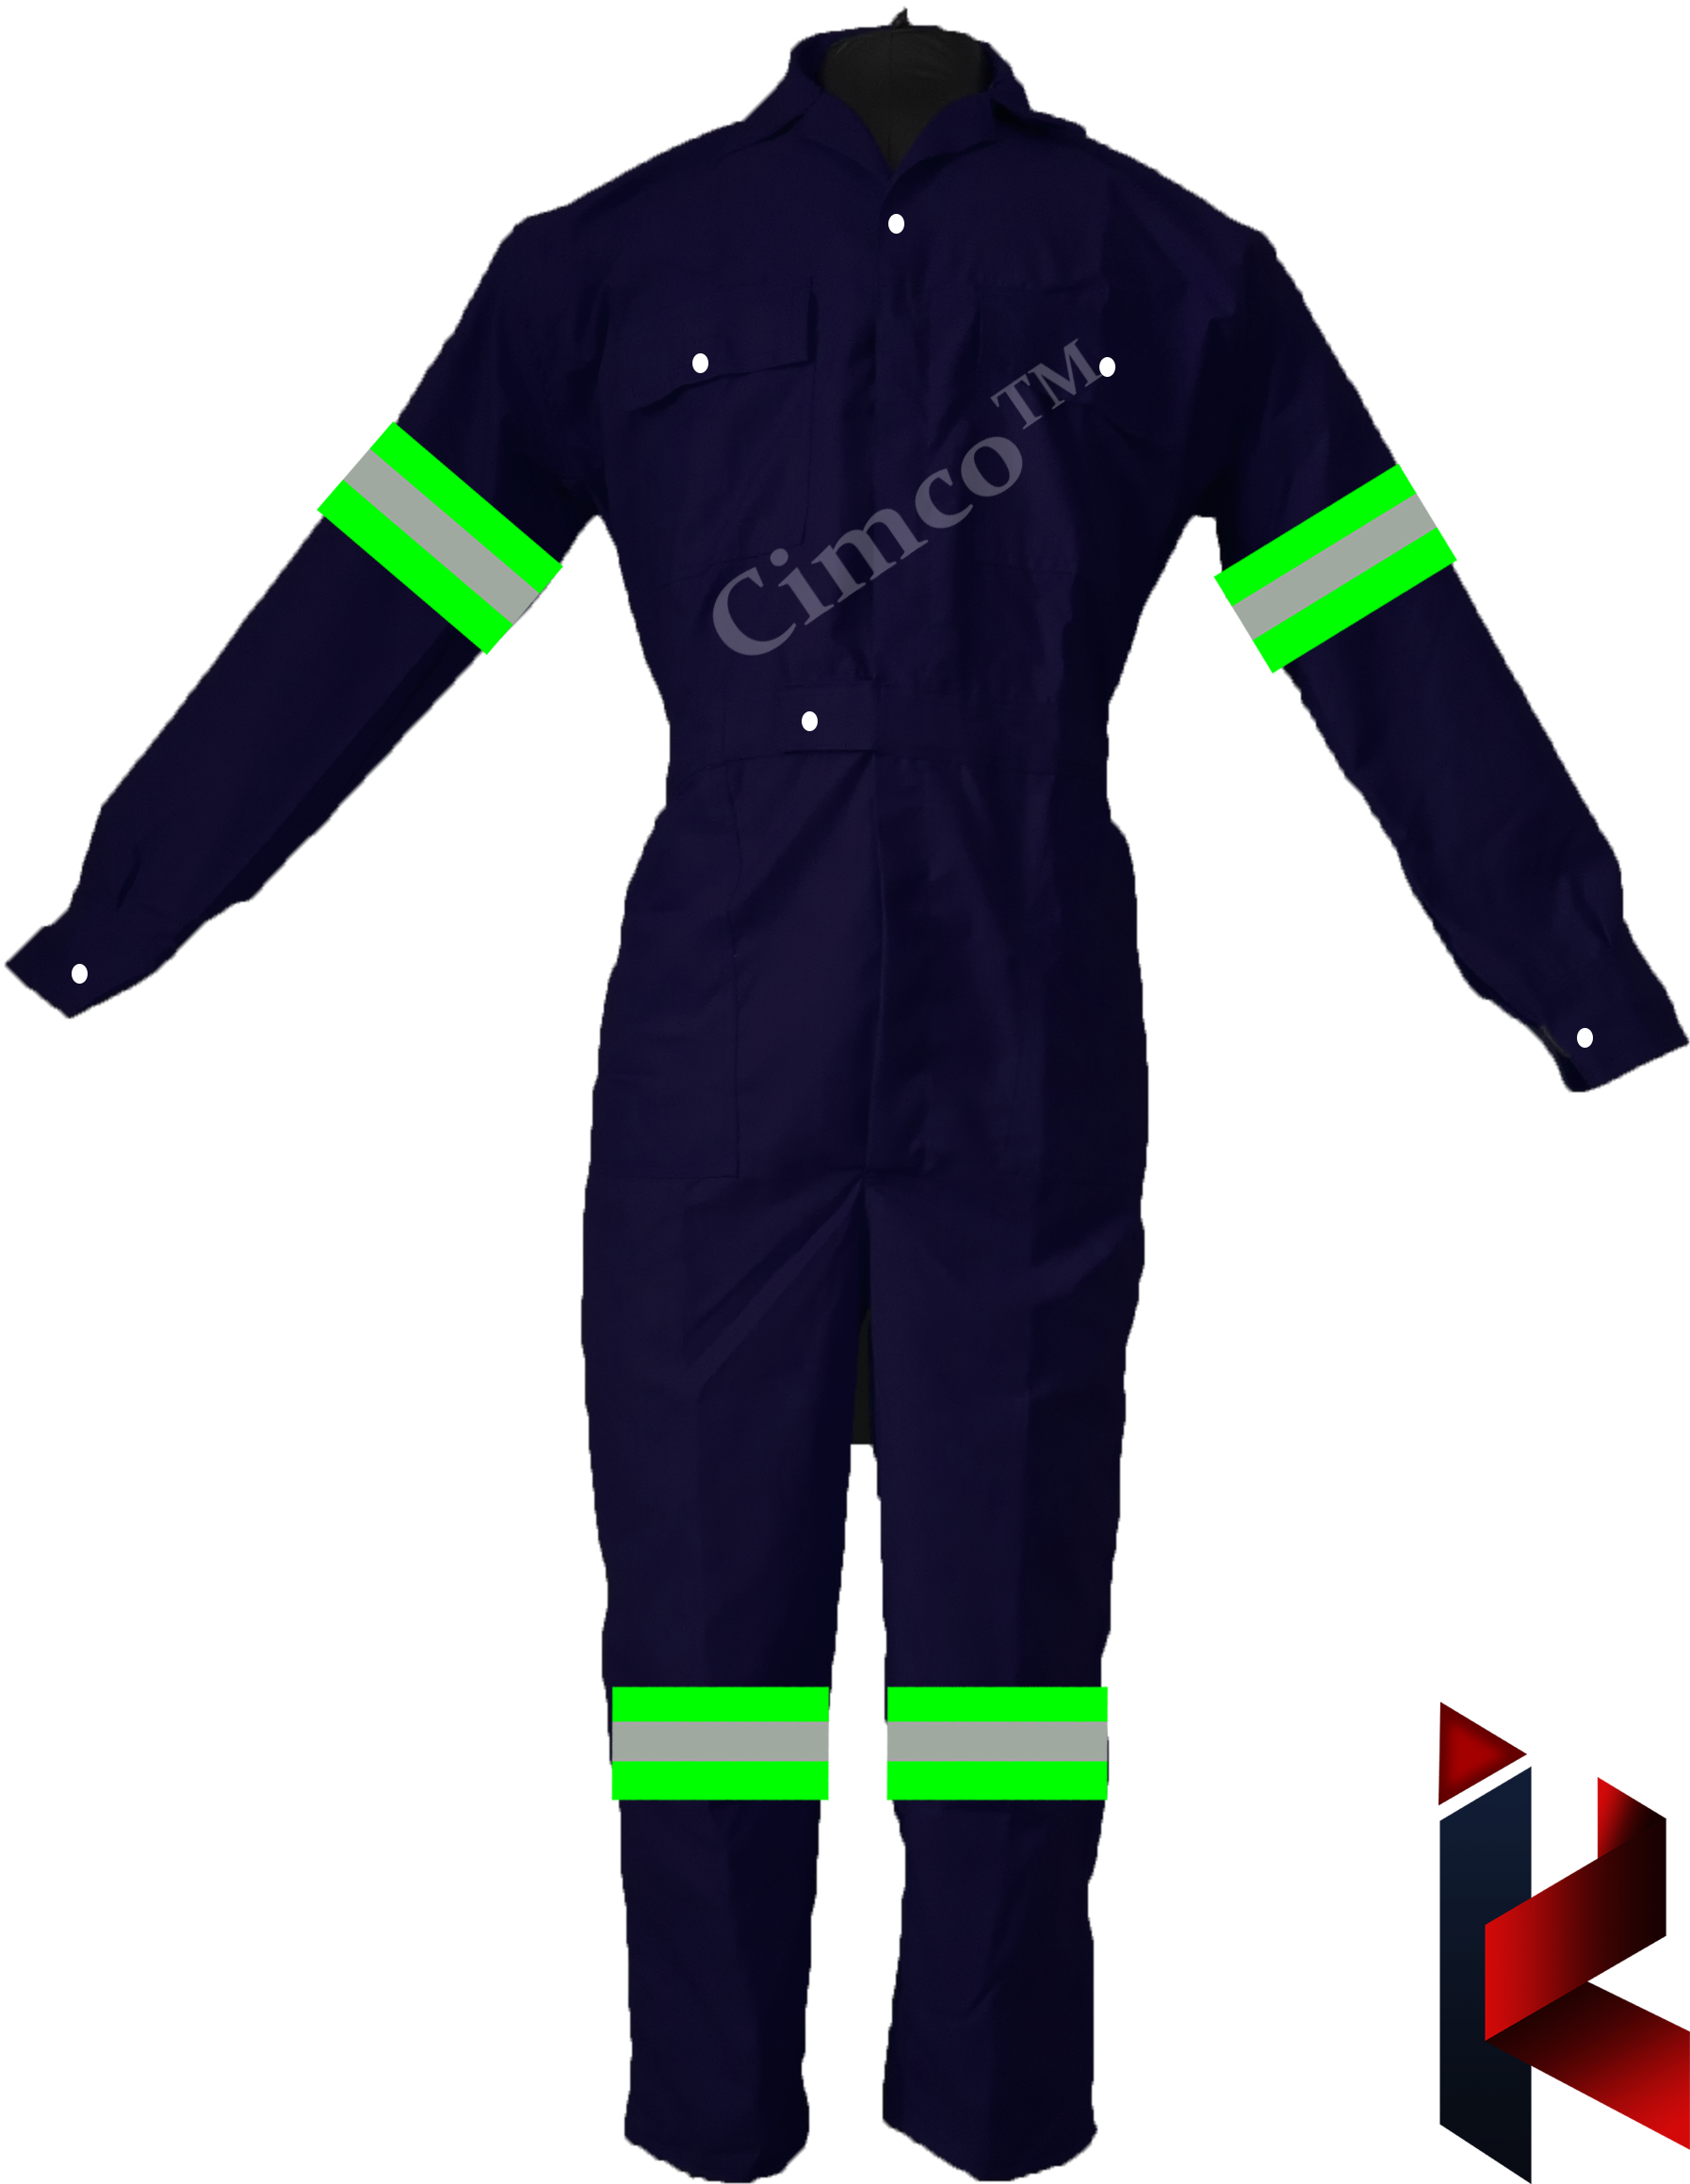 CIMCO | BOILERSUIT® 5411 IFR NAVY BLUE with Test Certificate